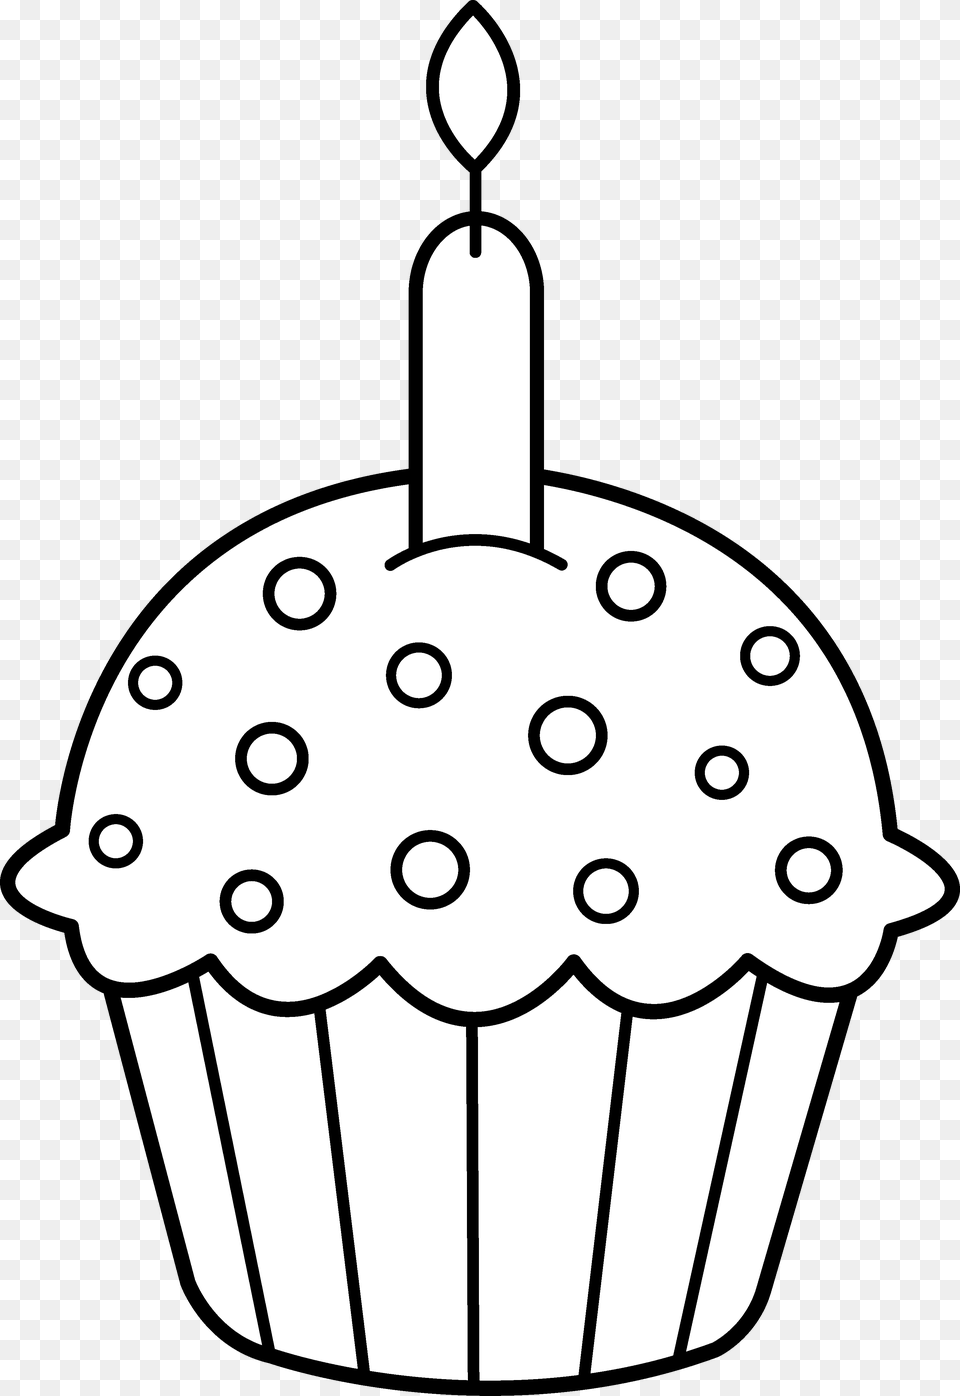 Icolor Cupcakes Roundtop Cupcake With Candle, Cake, Cream, Dessert, Food Free Png